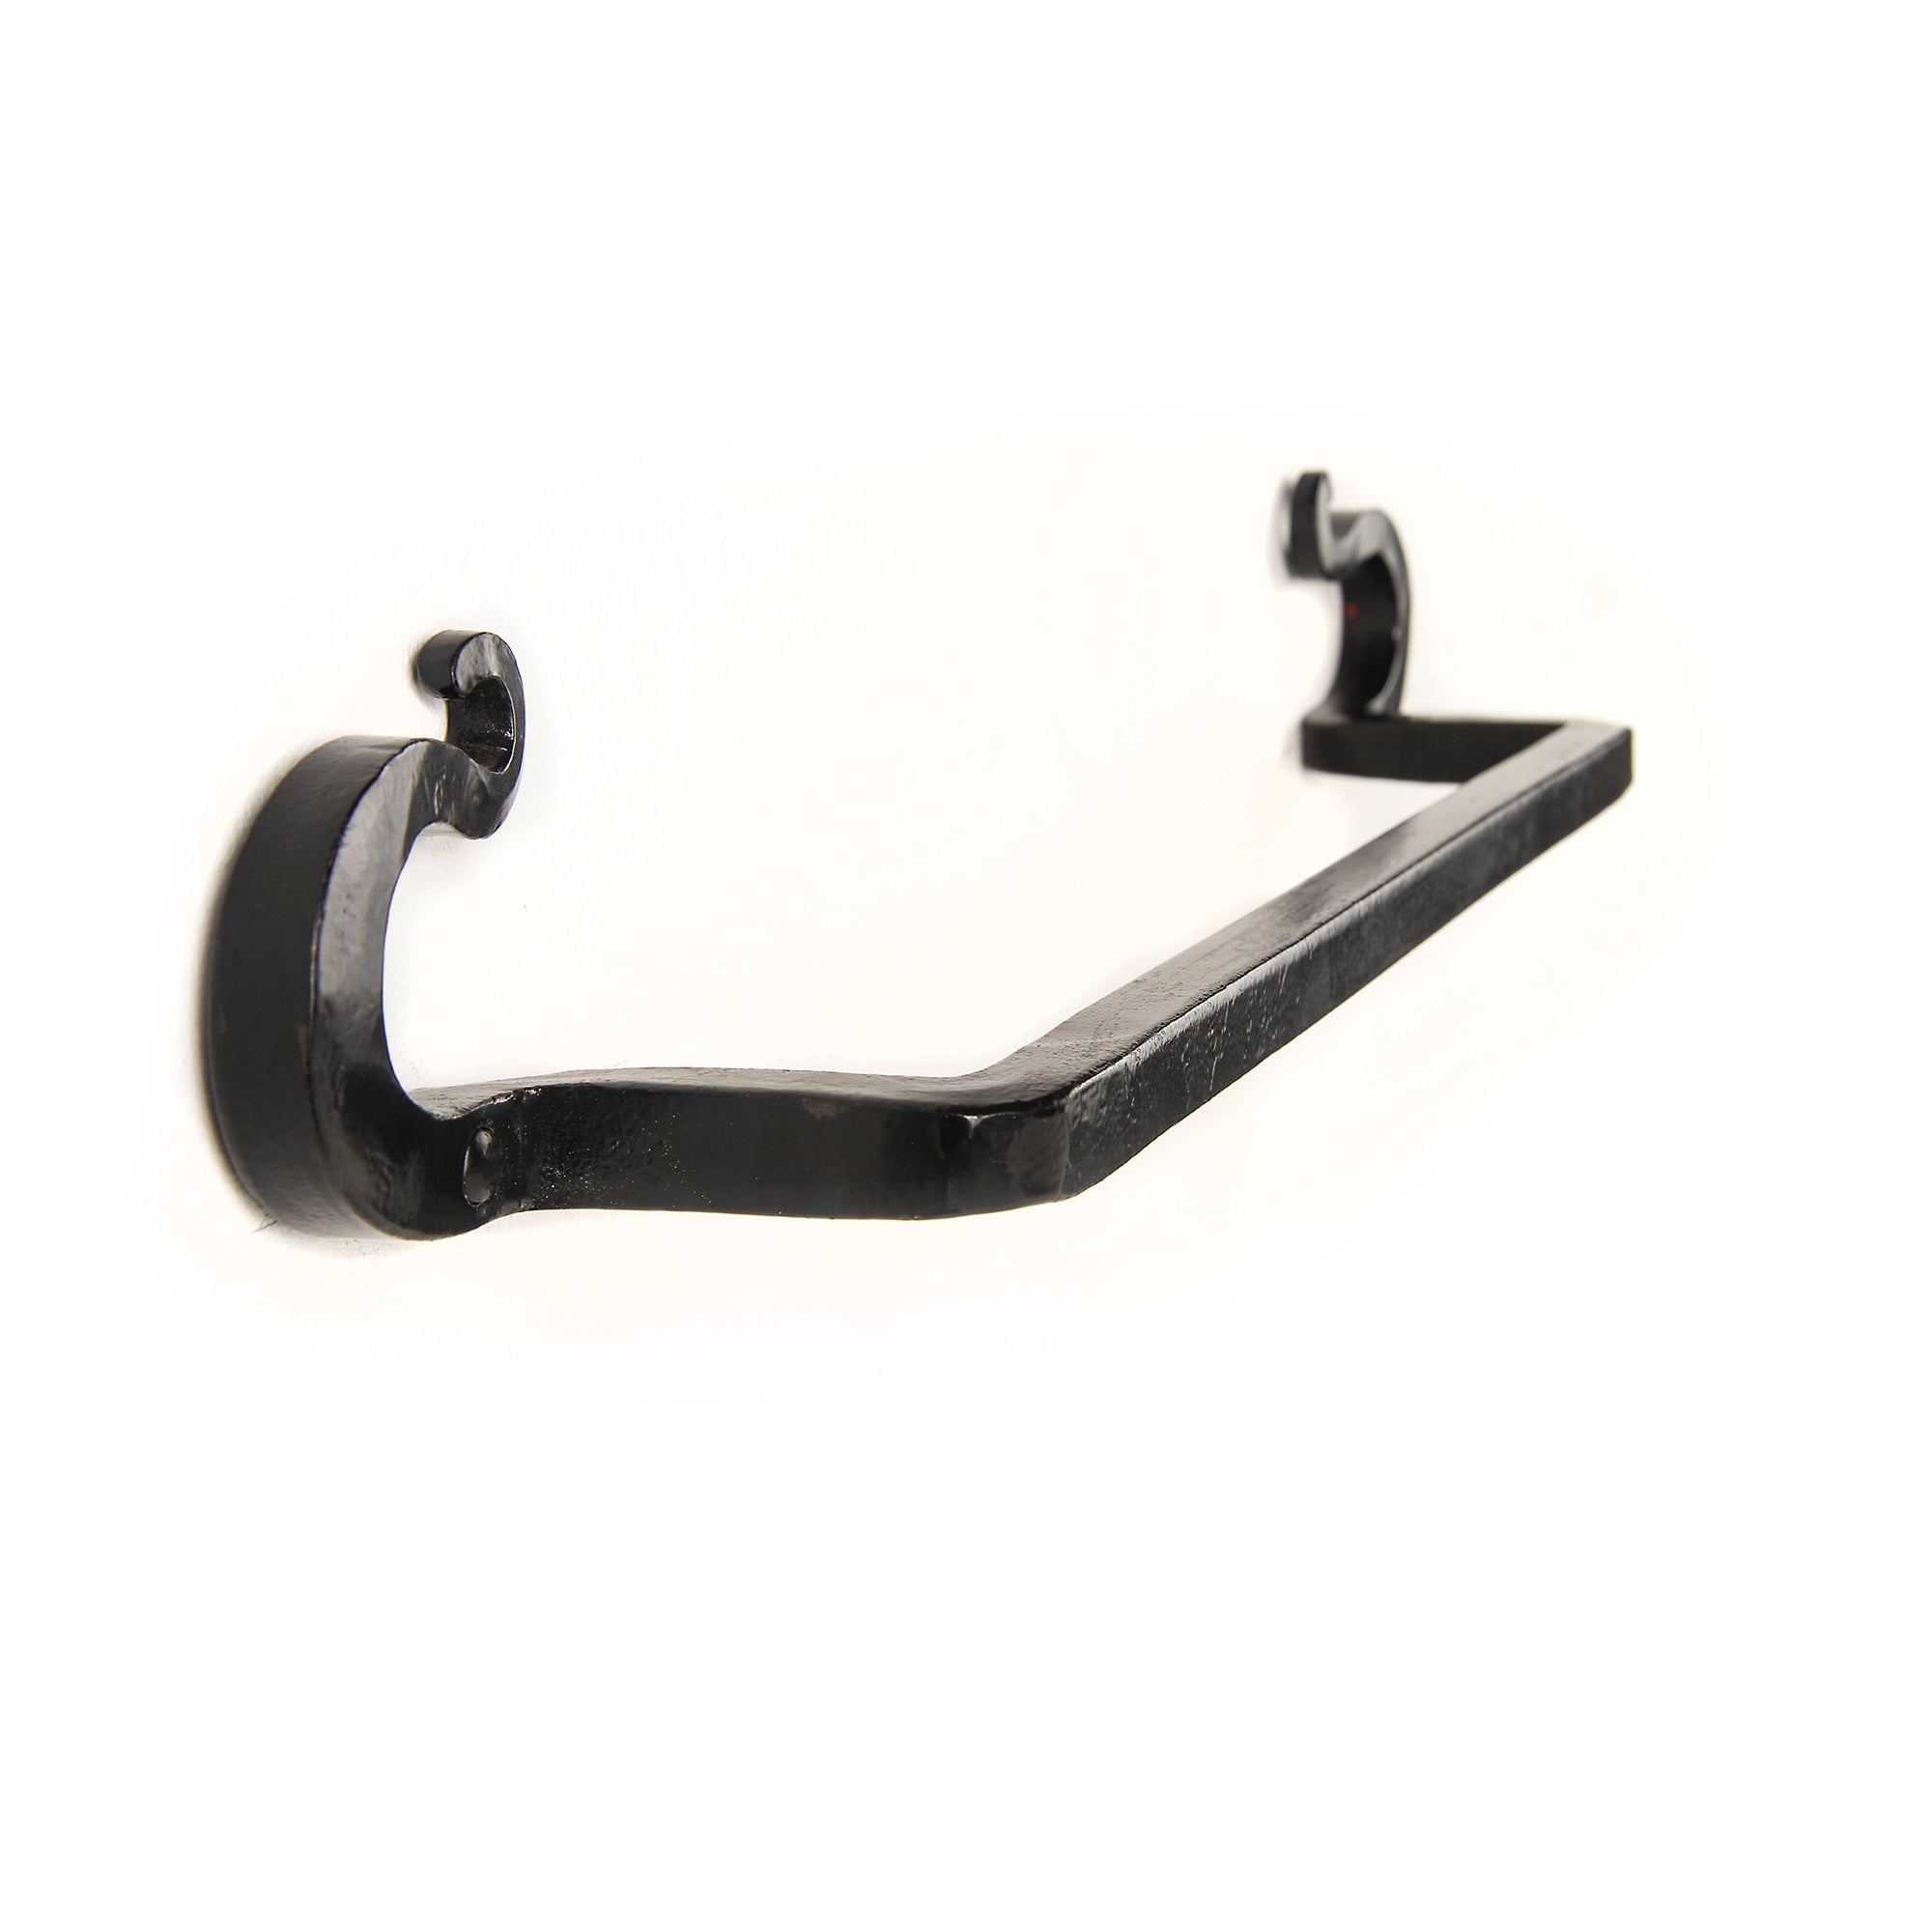 Hand-Forged Wrought Iron Towel Bar